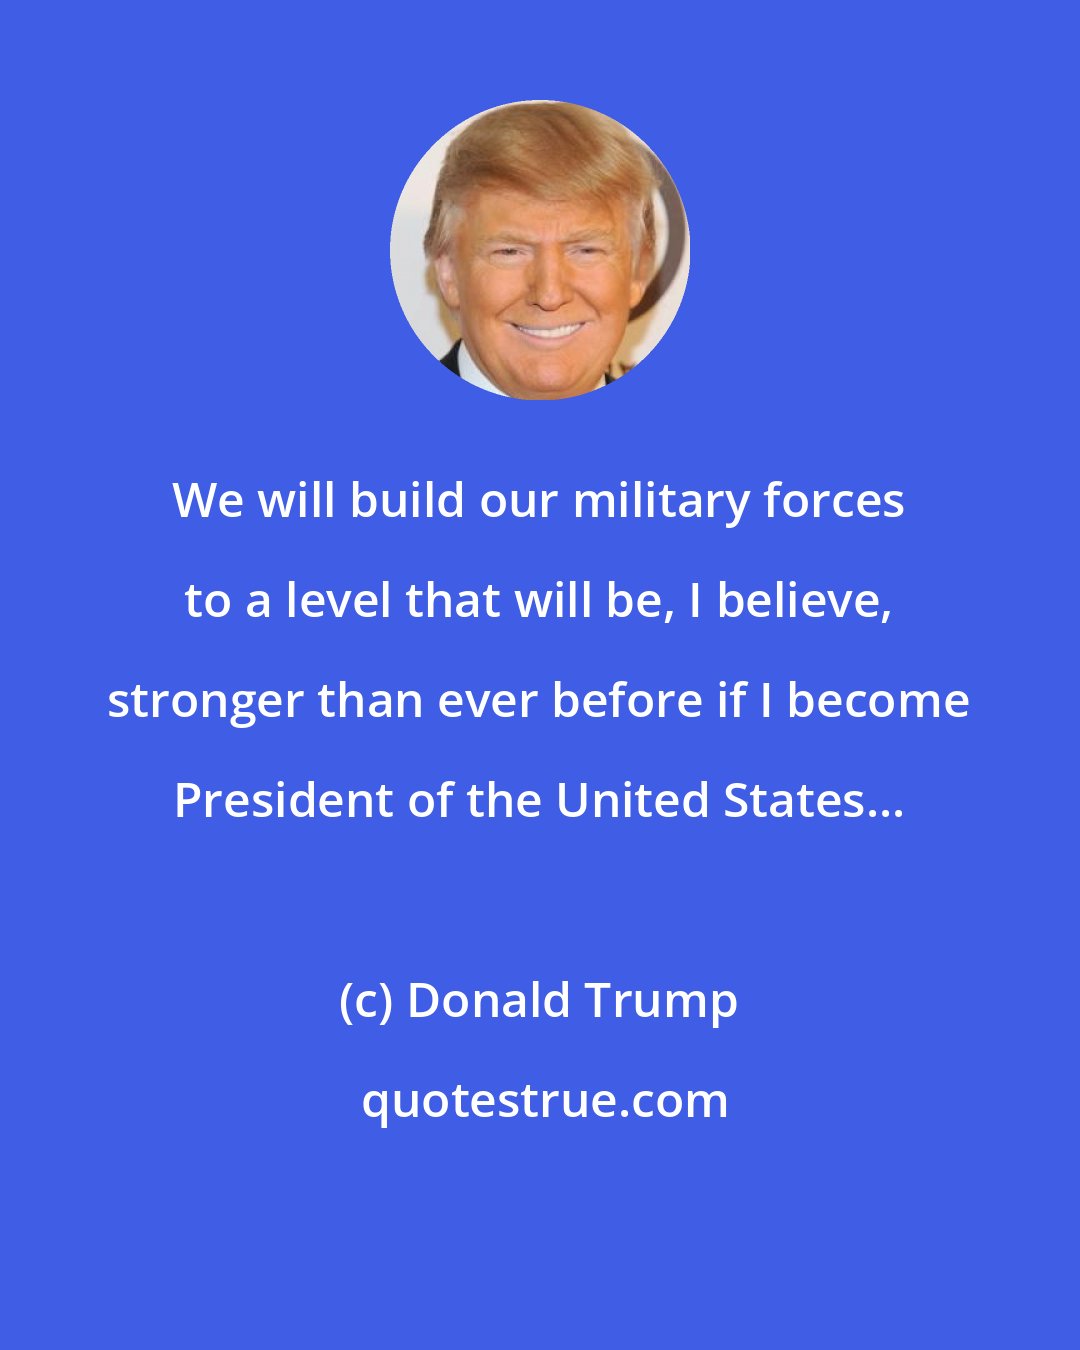 Donald Trump: We will build our military forces to a level that will be, I believe, stronger than ever before if I become President of the United States...